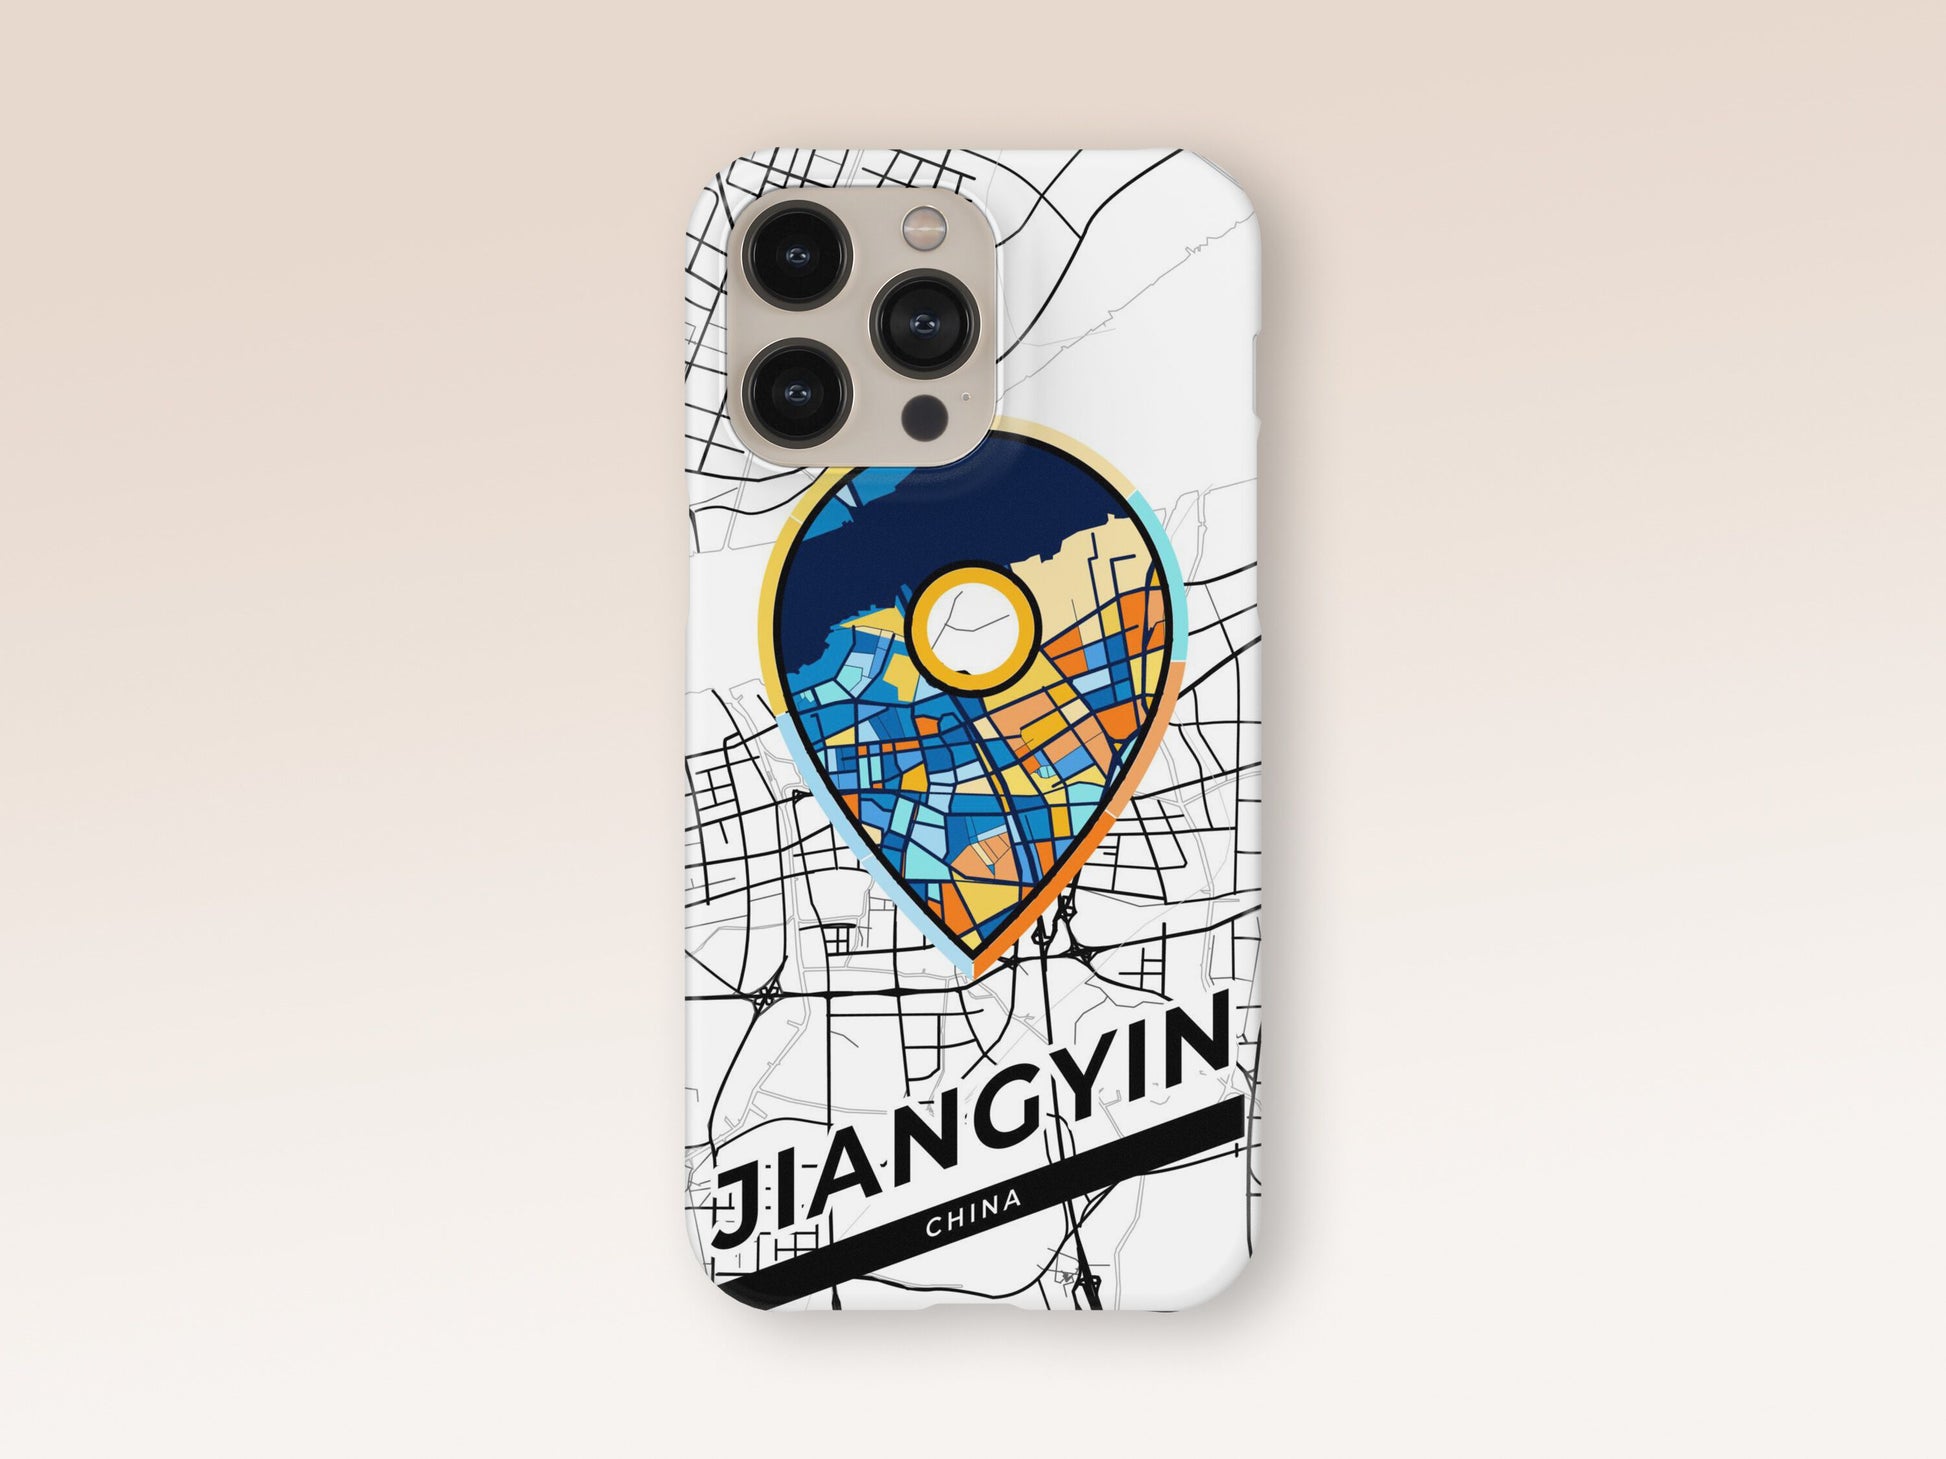 Jiangyin China slim phone case with colorful icon. Birthday, wedding or housewarming gift. Couple match cases. 1